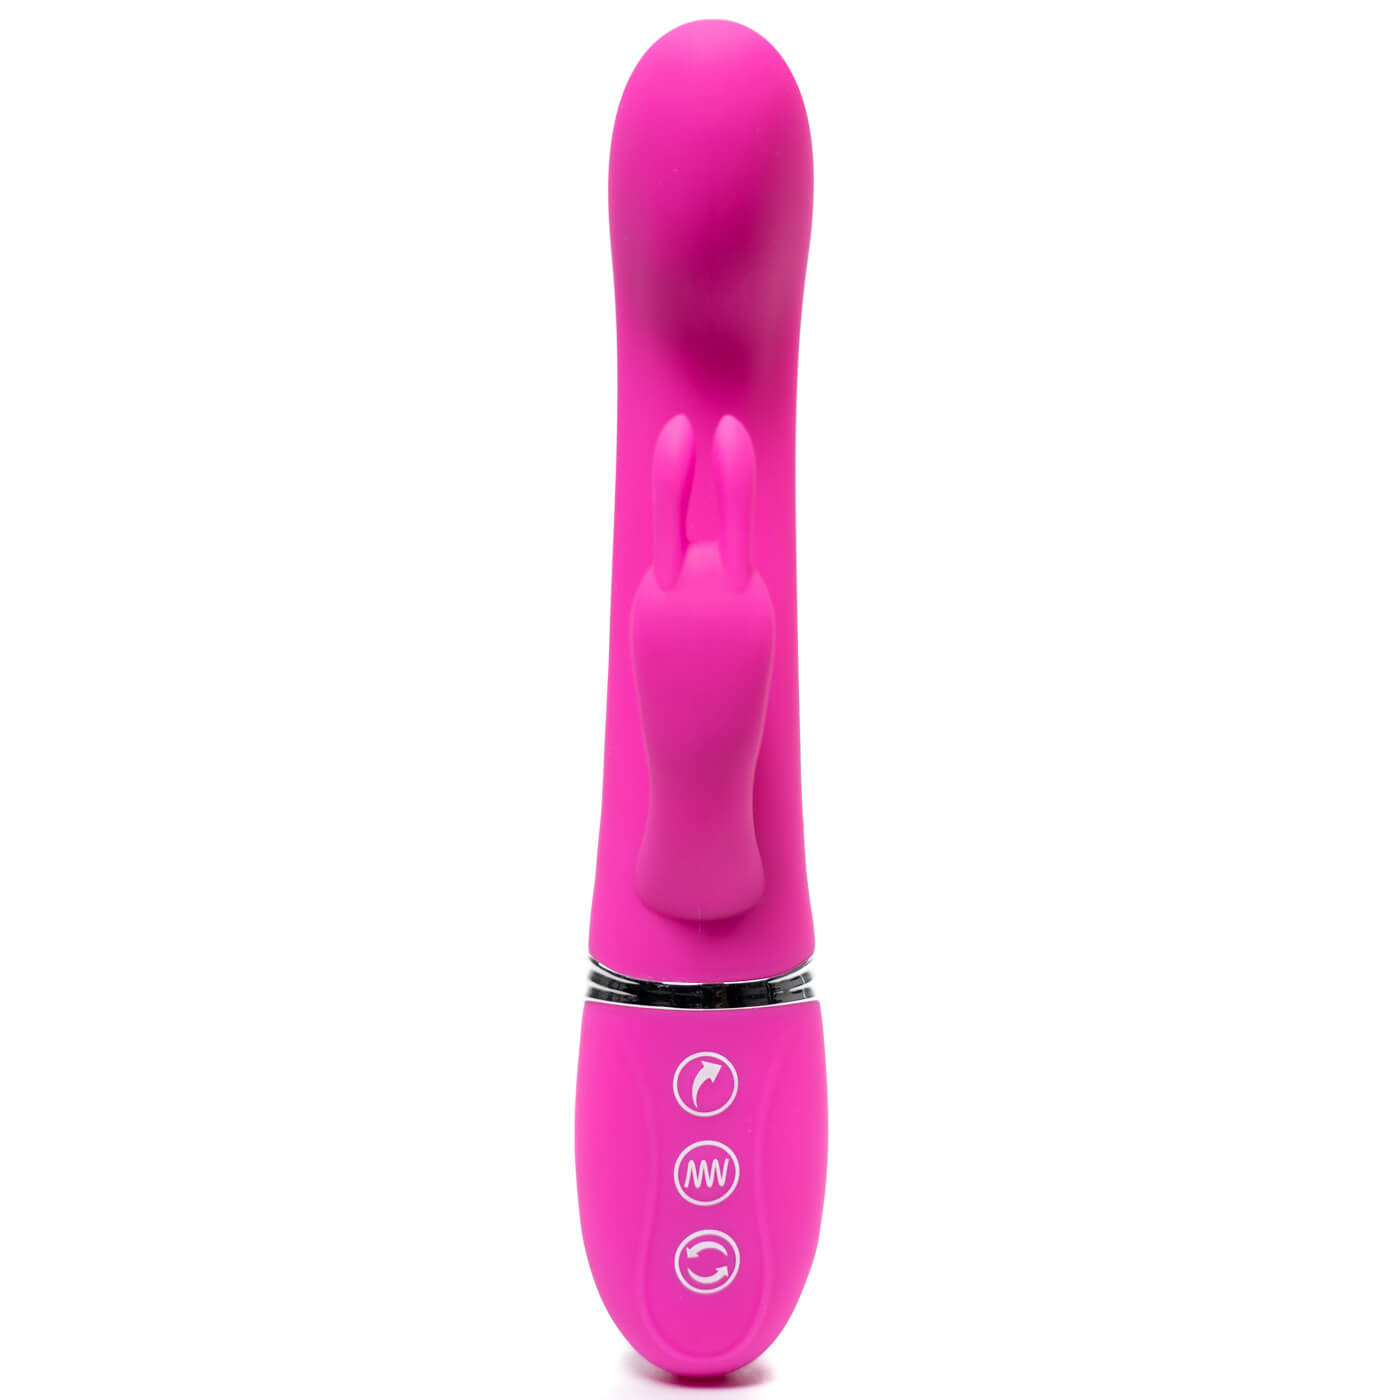 DUALITY 10 Function Rotating Rechargeable Dual Motor G-Spot Rabbit Vibrator